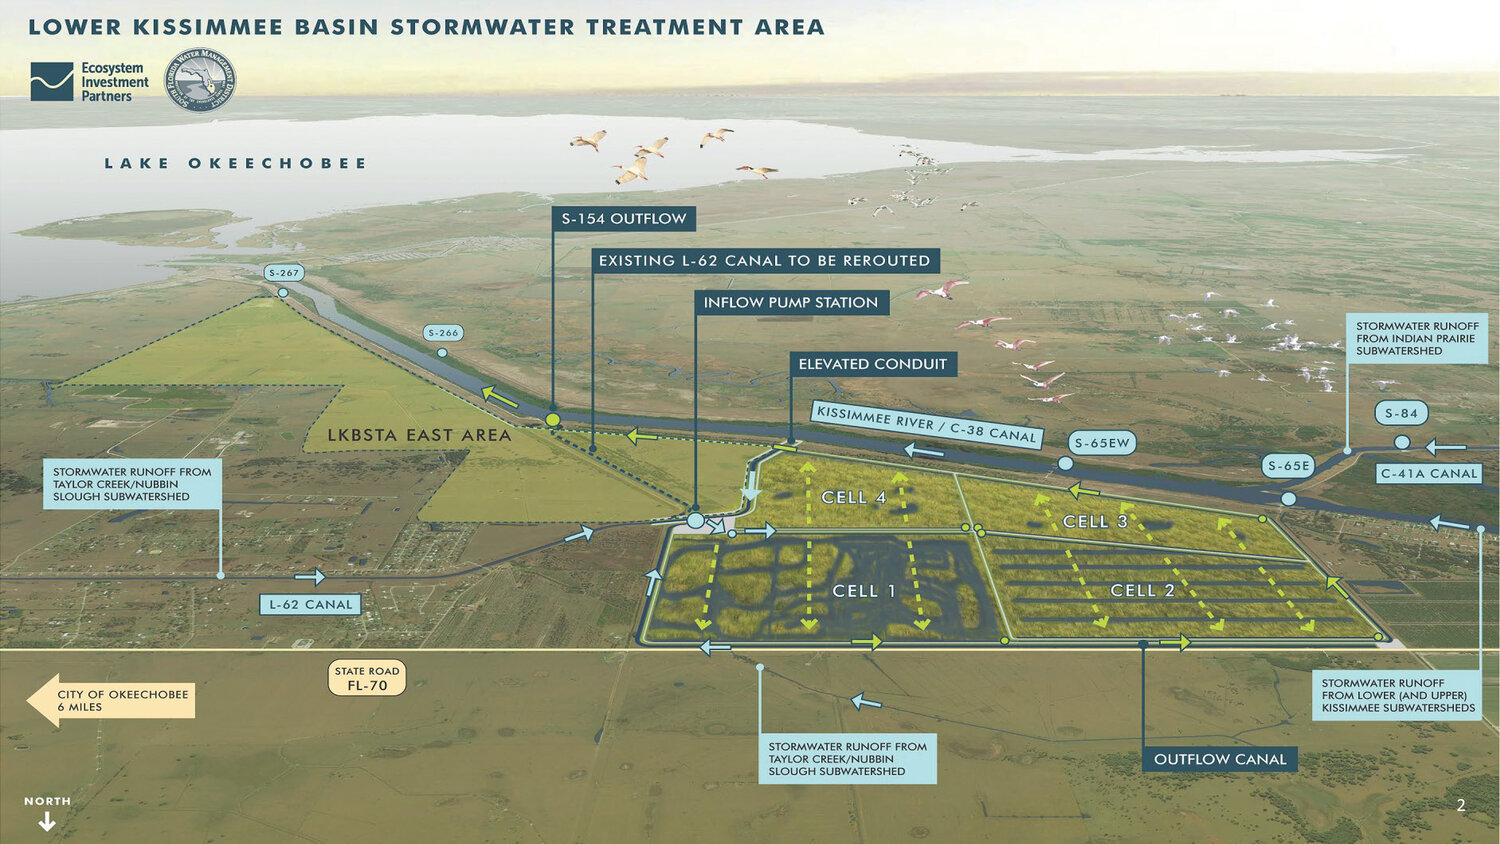 The Lower Kissimmee Basin Stormwater Treatment Area (LKBSTA) project is planned east of the Kissimmee River and south of State Road 70